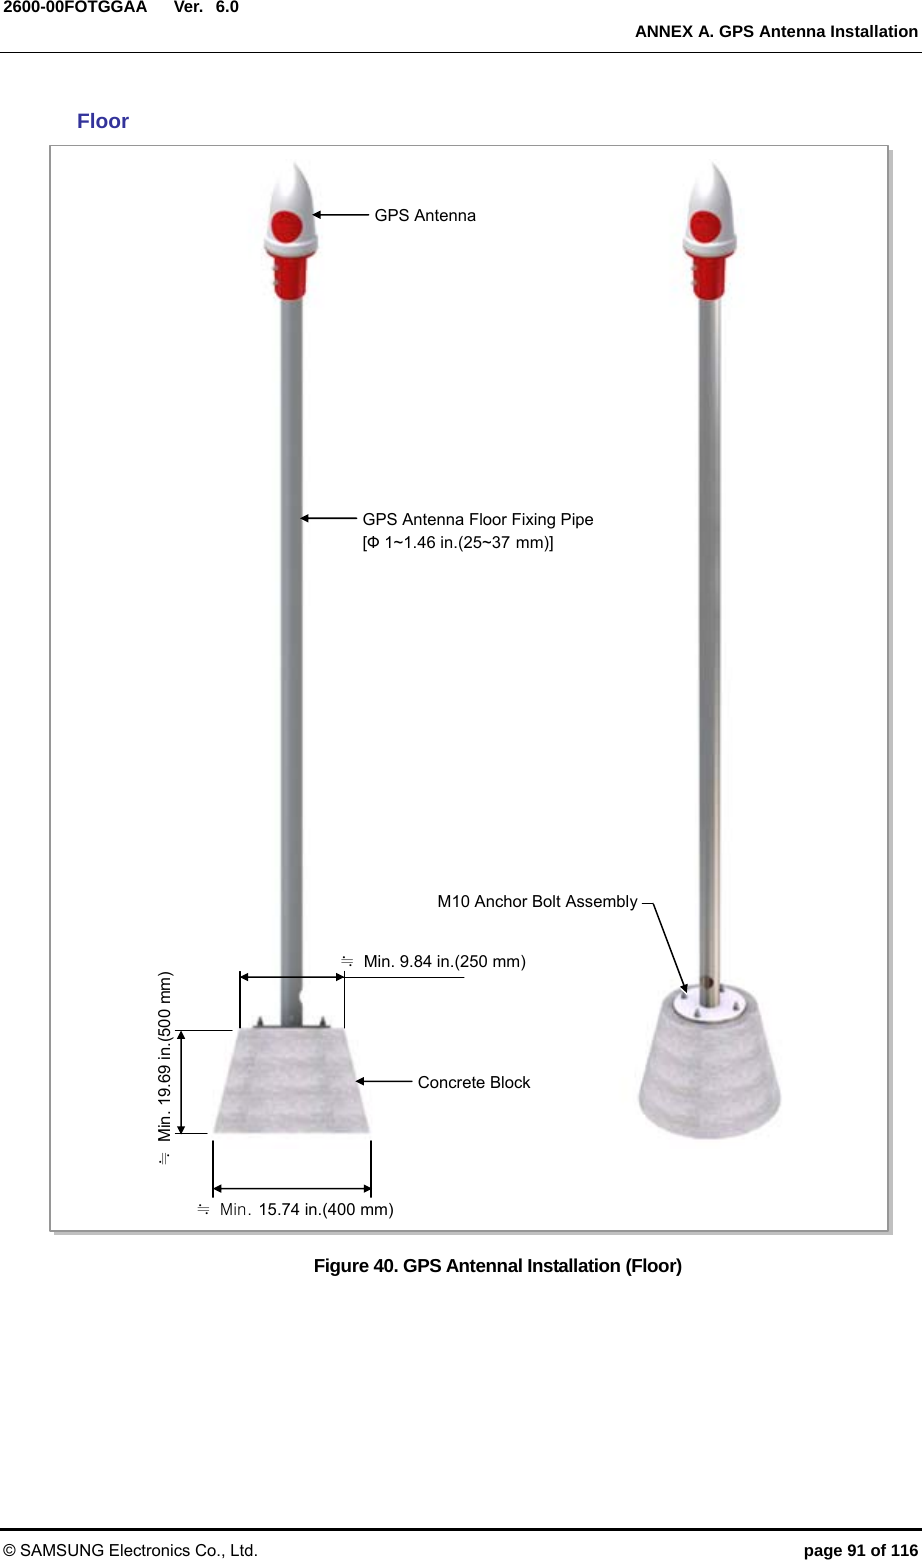  Ver.  ANNEX A. GPS Antenna Installation © SAMSUNG Electronics Co., Ltd.  page 91 of 116 2600-00FOTGGAA 6.0 Floor Figure 40. GPS Antennal Installation (Floor)  GPS Antenna Floor Fixing Pipe [Ф 1~1.46 in.(25~37 mm)] GPS AntennaM10 Anchor Bolt Assembly≒  Min. 19.69 in.(500 mm)   Concrete Block≒  Min. 15.74 in.(400 mm) ≒  Min. 9.84 in.(250 mm) 